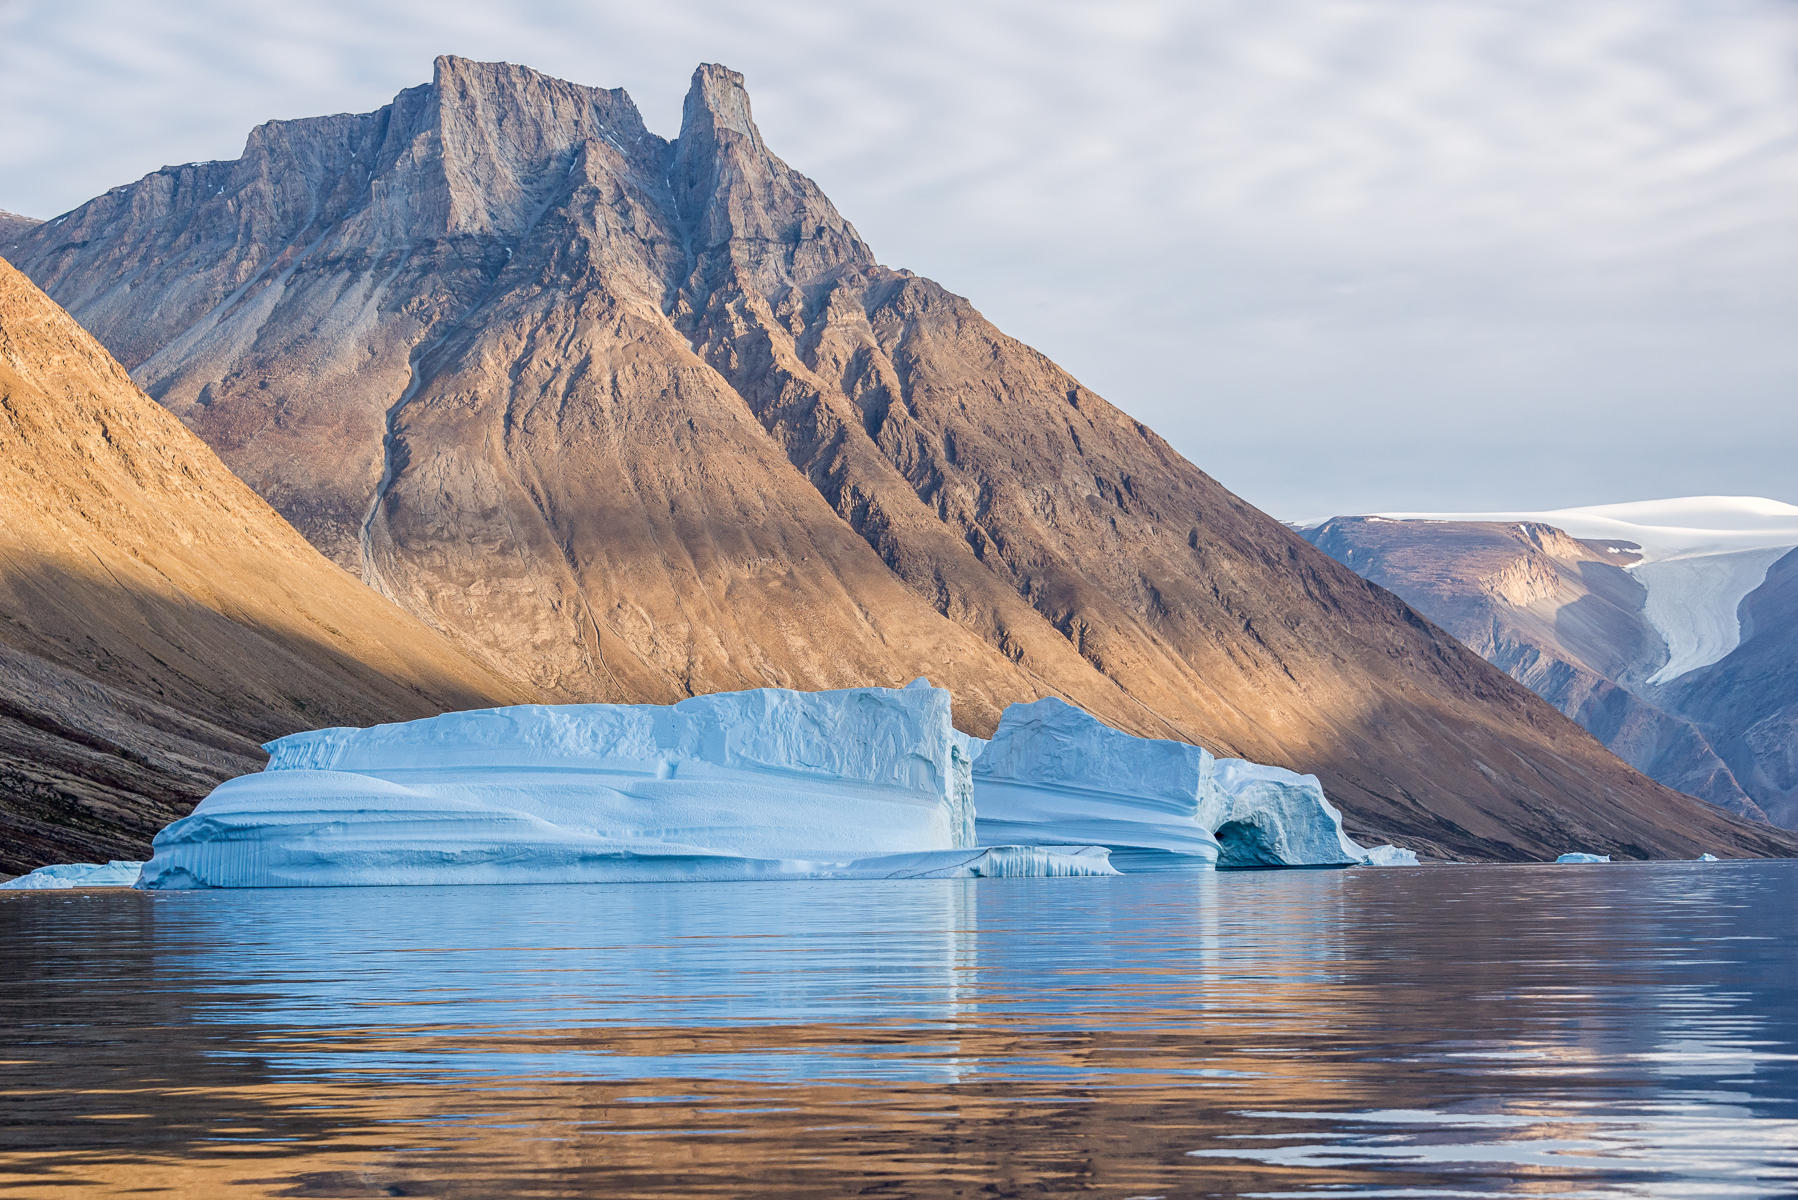 The Channel, Greenland : Arctic, A Sea of Ice : ELIZABETH SANJUAN PHOTOGRAPHY